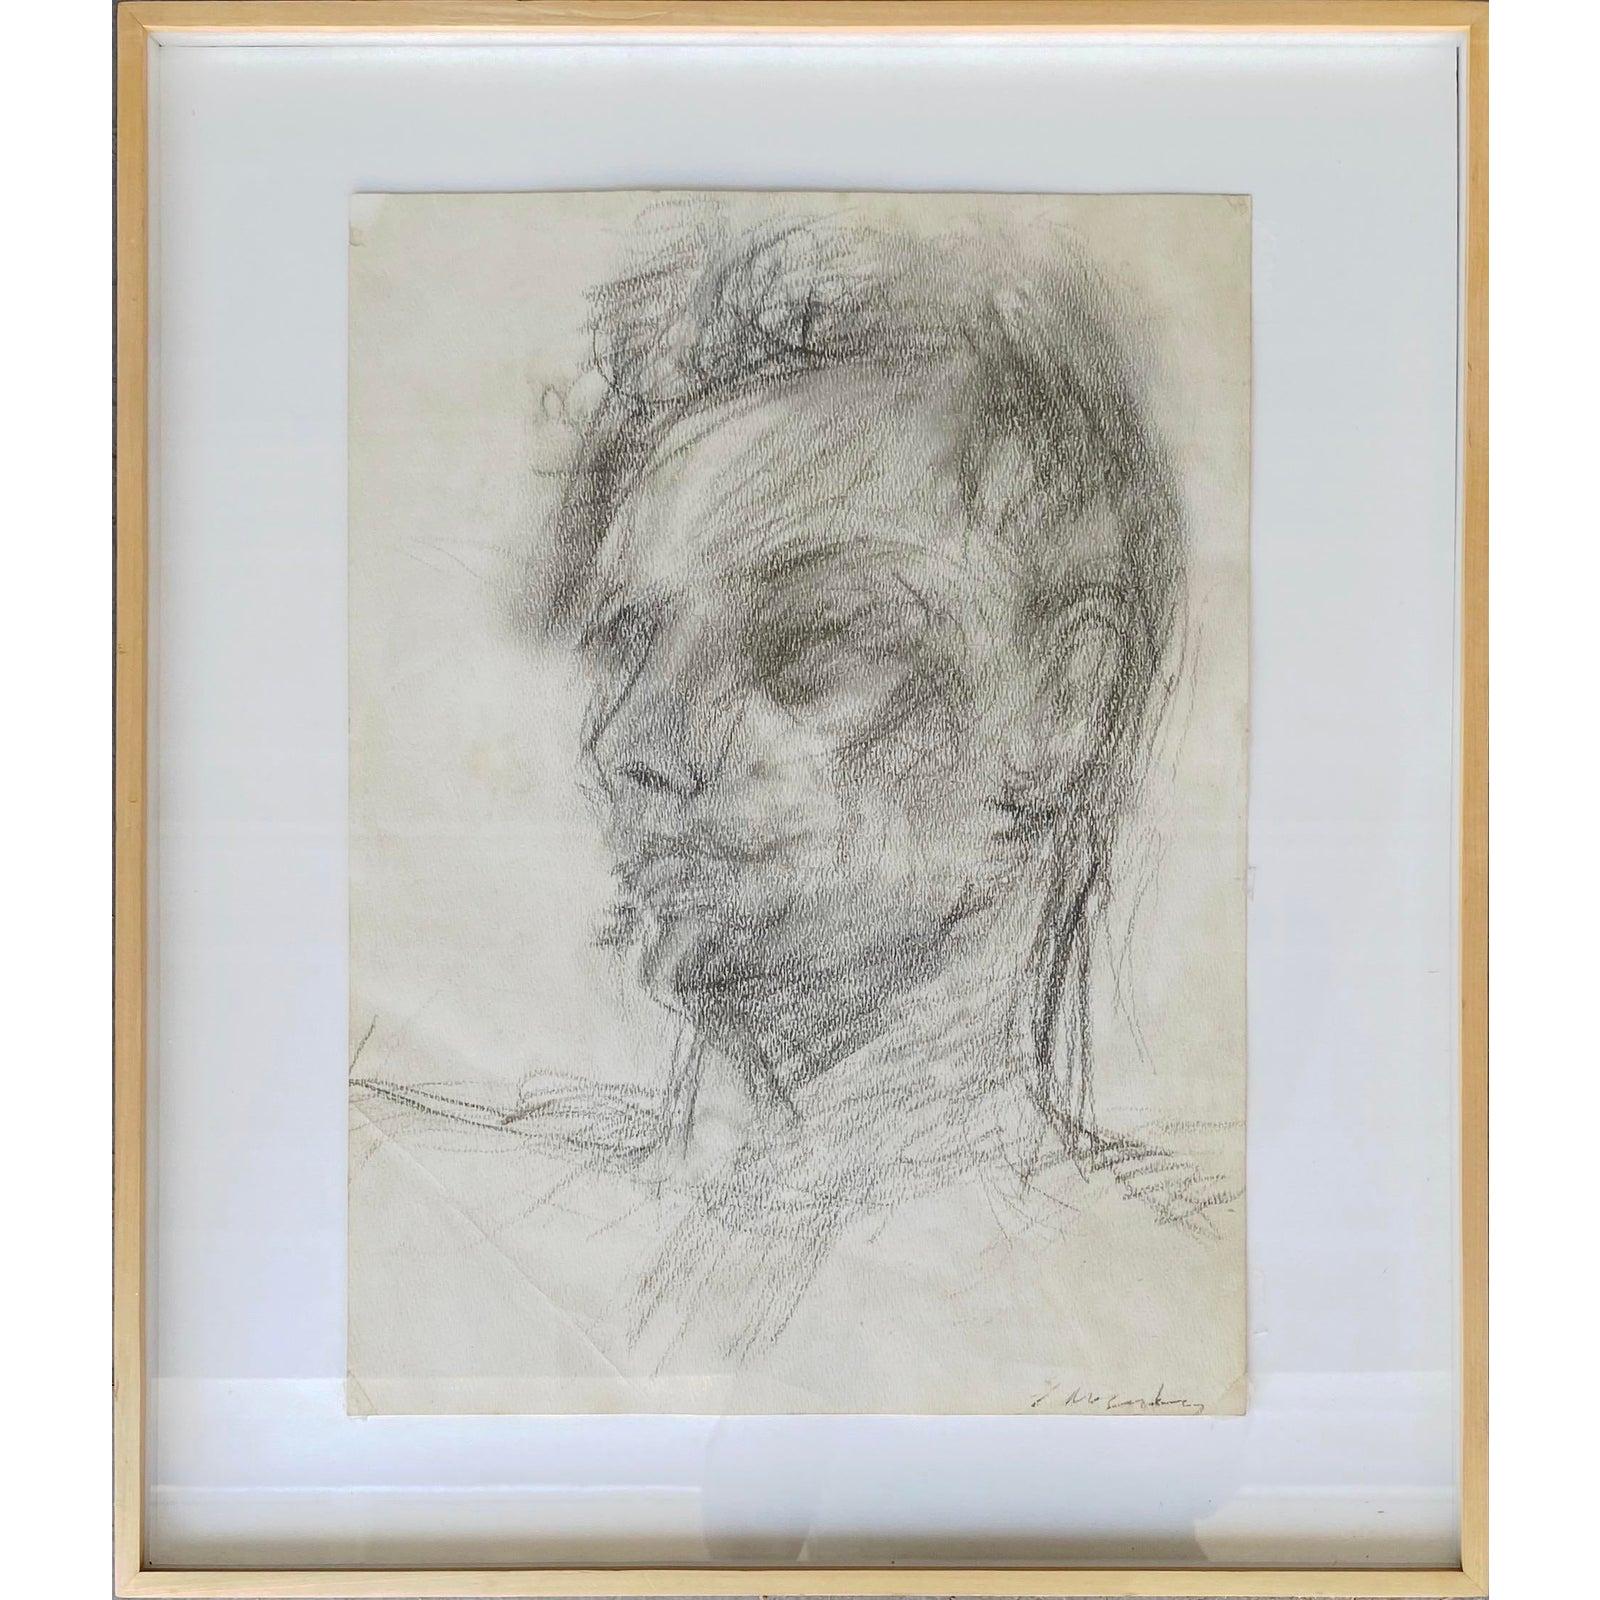 This is a framed abstract portrait of a man in a floating oak finish frame. Drawing is marked with artist’s signature, although hard to figure out the marking. Drawing is in pencil with glass on frame. Art is 10.75” x 15”; frame is 19.25” x 16.5” x